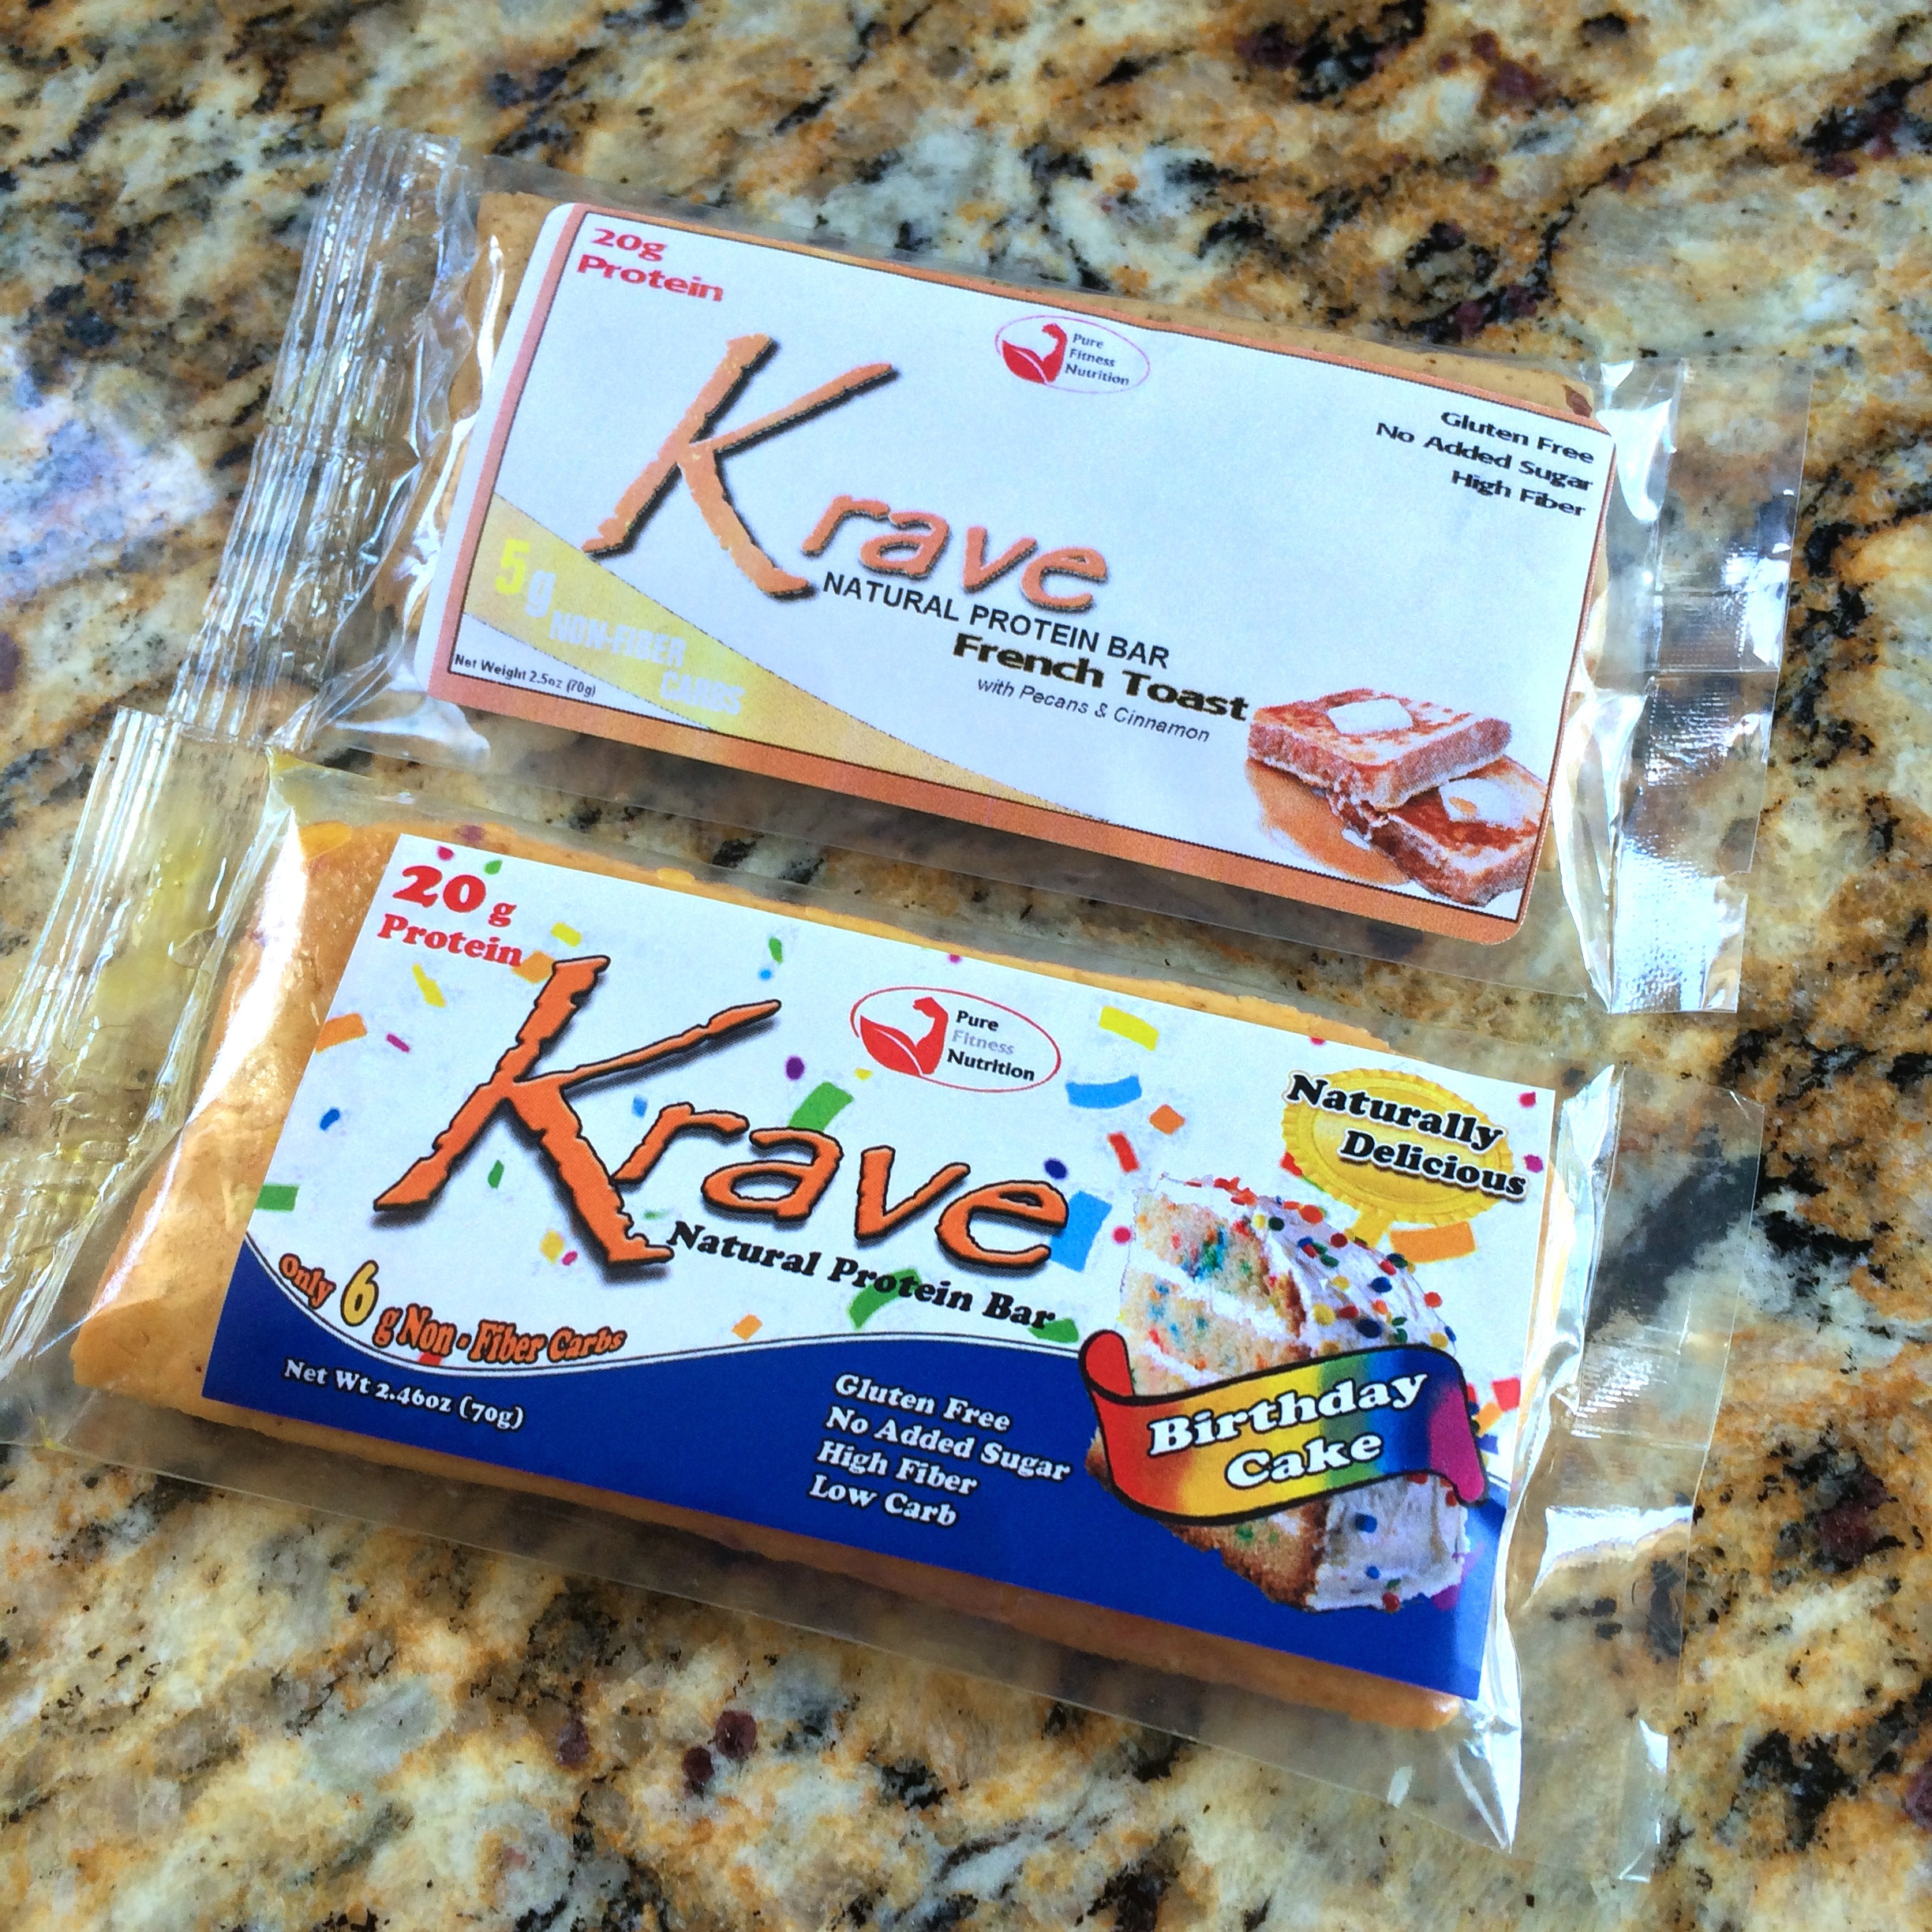 One Birthday Cake Protein Bar
 Krave Protein Bar Review Part 2 – Isabelle Ison